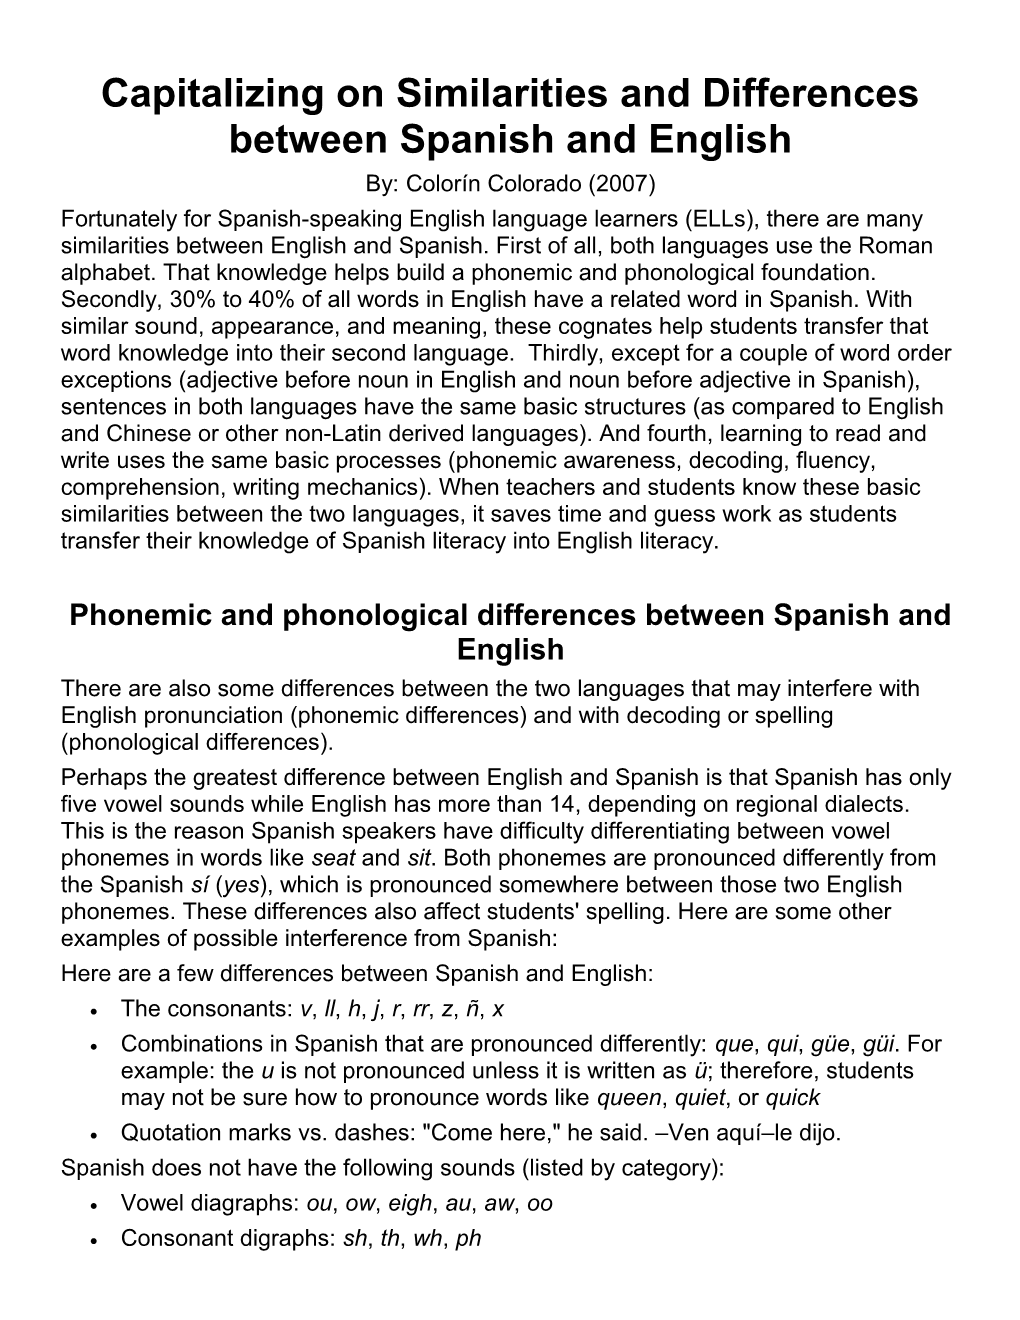 Capitalizing on Similarities and Differences Between Spanish and English